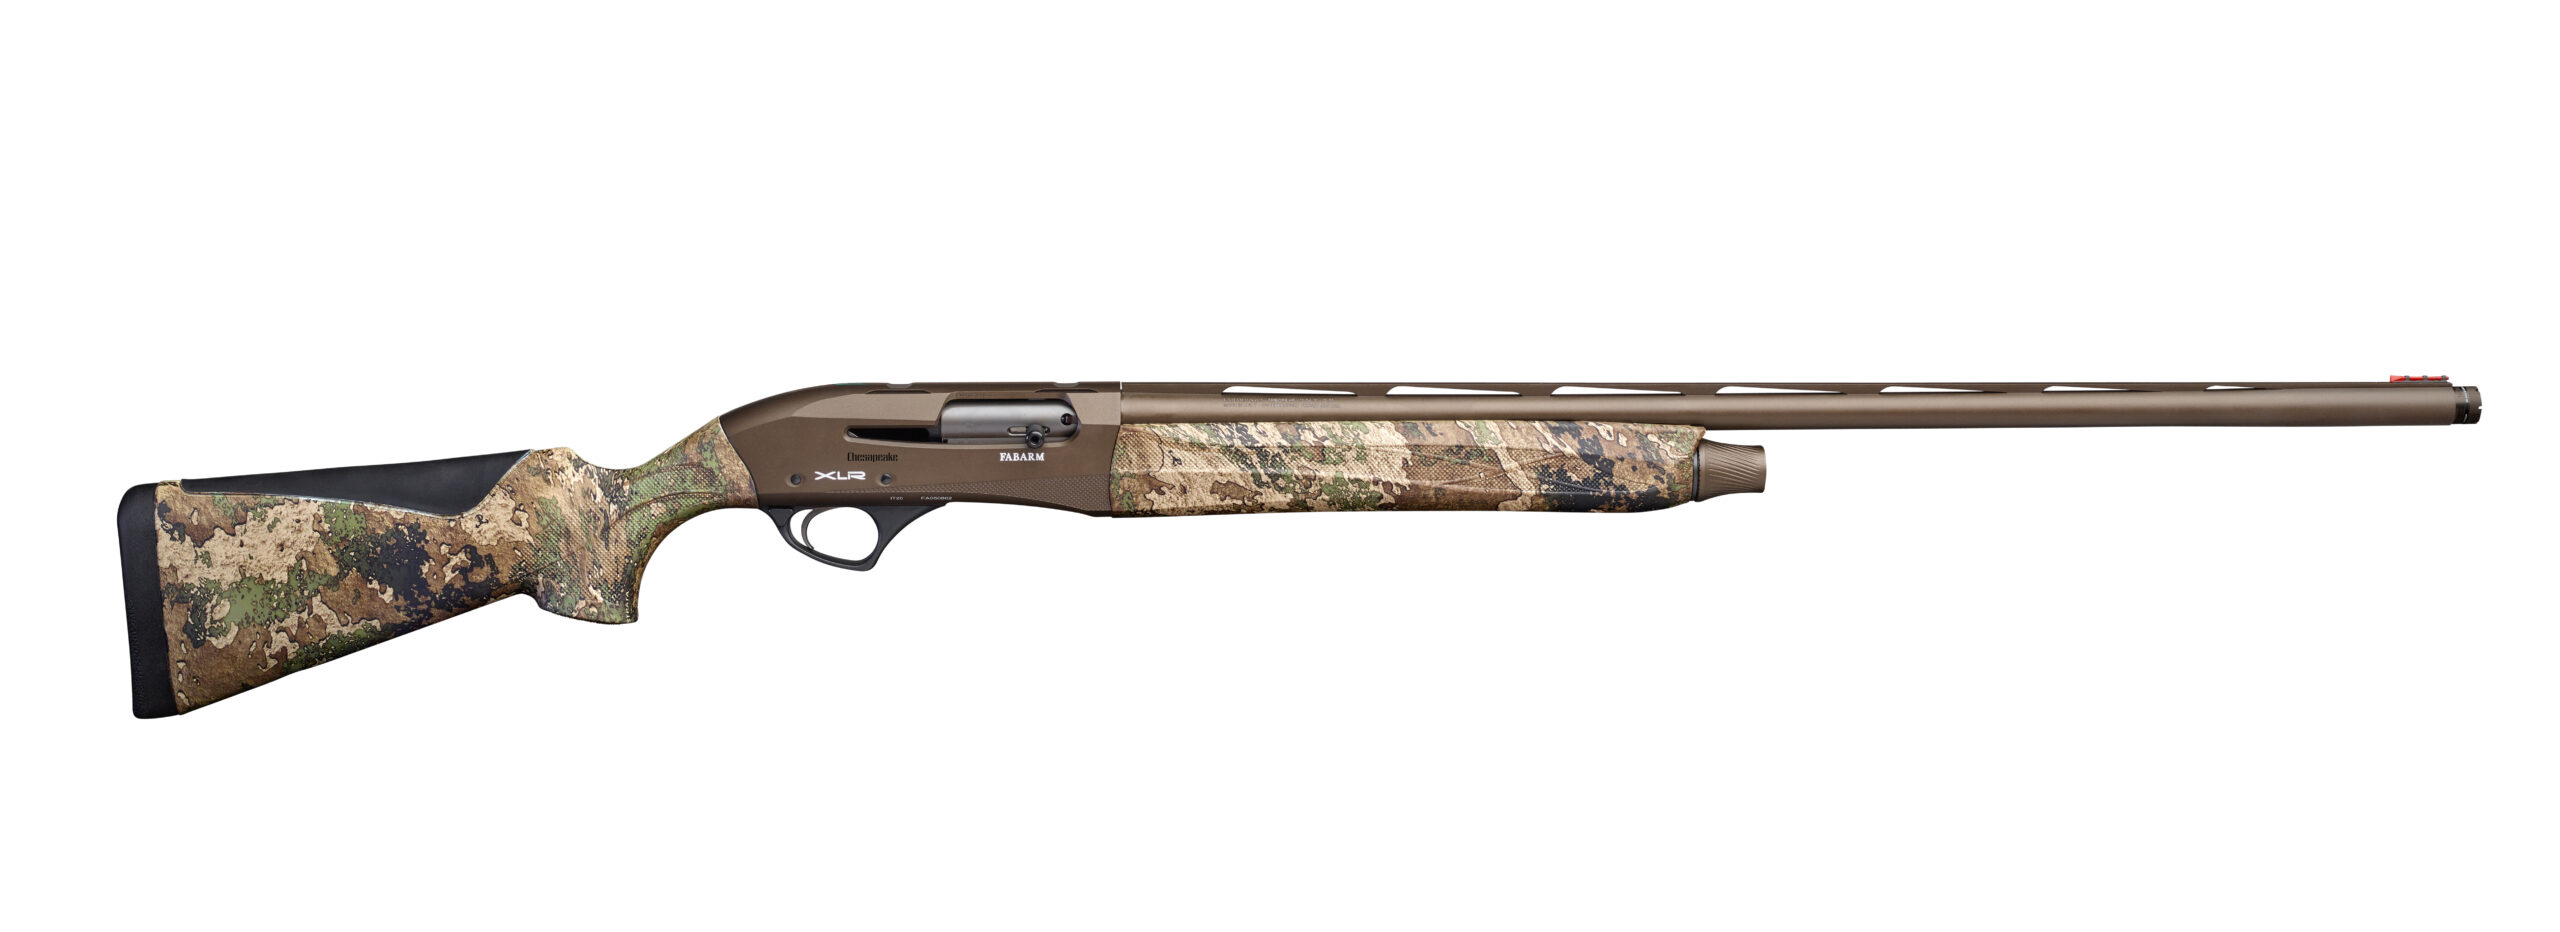 Fabarm's Chesapeake has a Cerakote barrel and action.